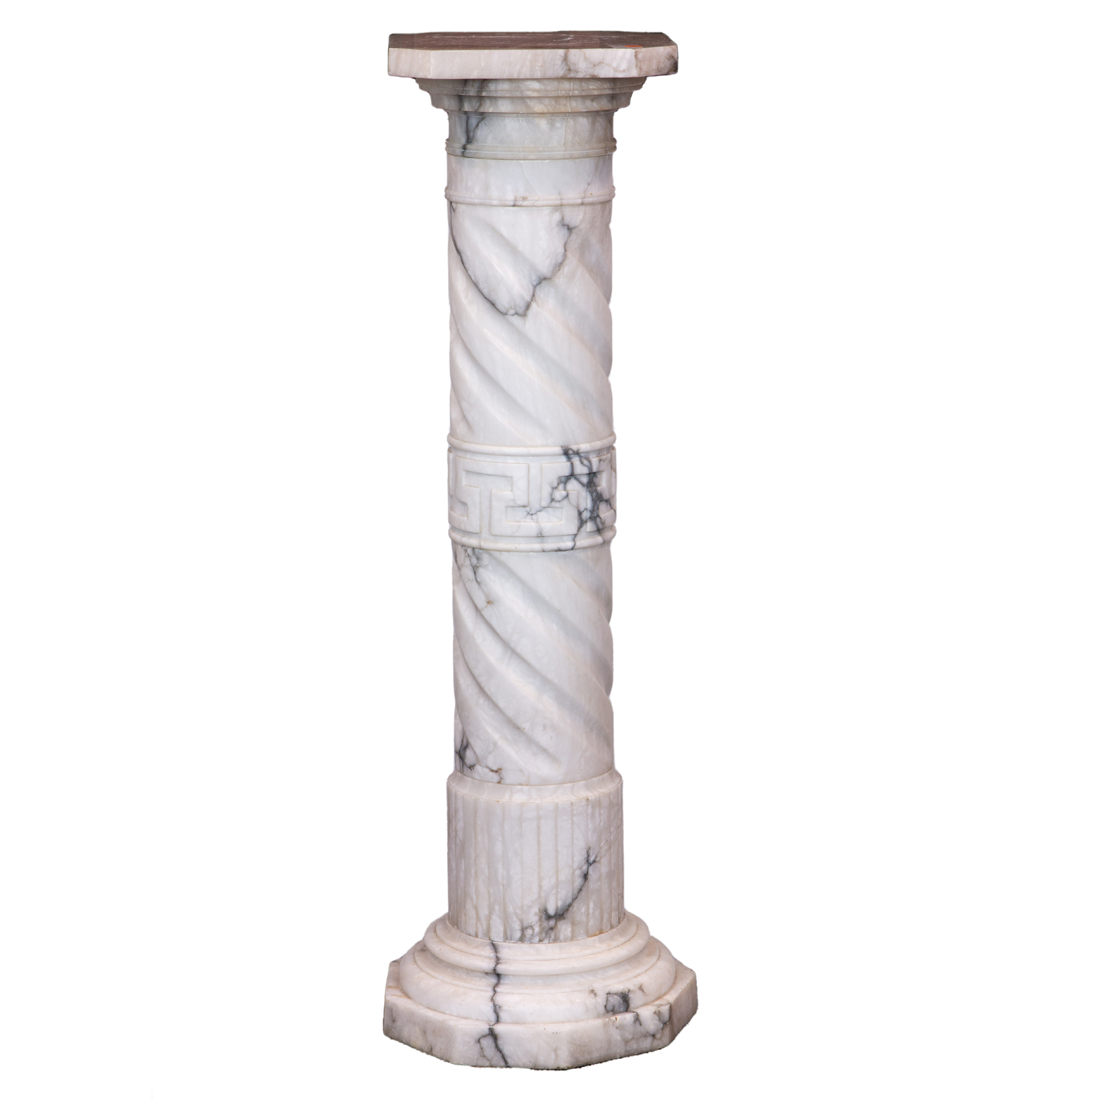 A NEOCLASSICAL STYLE ALABASTER 2d128c